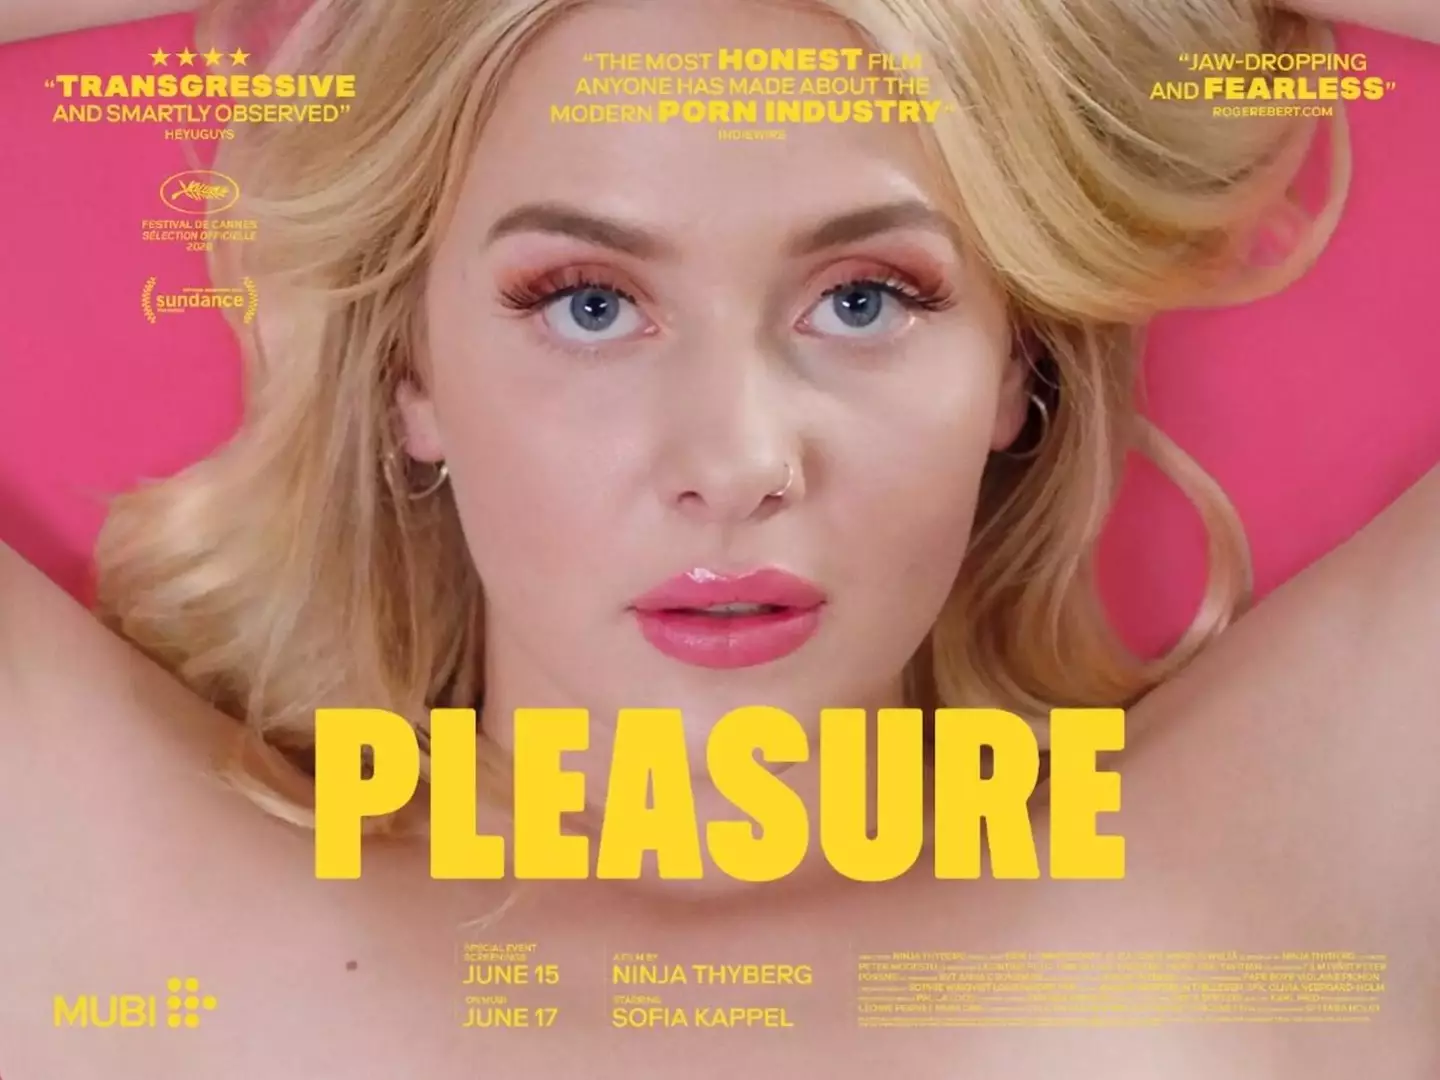 Pleasure has been criticsed for being 'too honest' about the adult film industry.